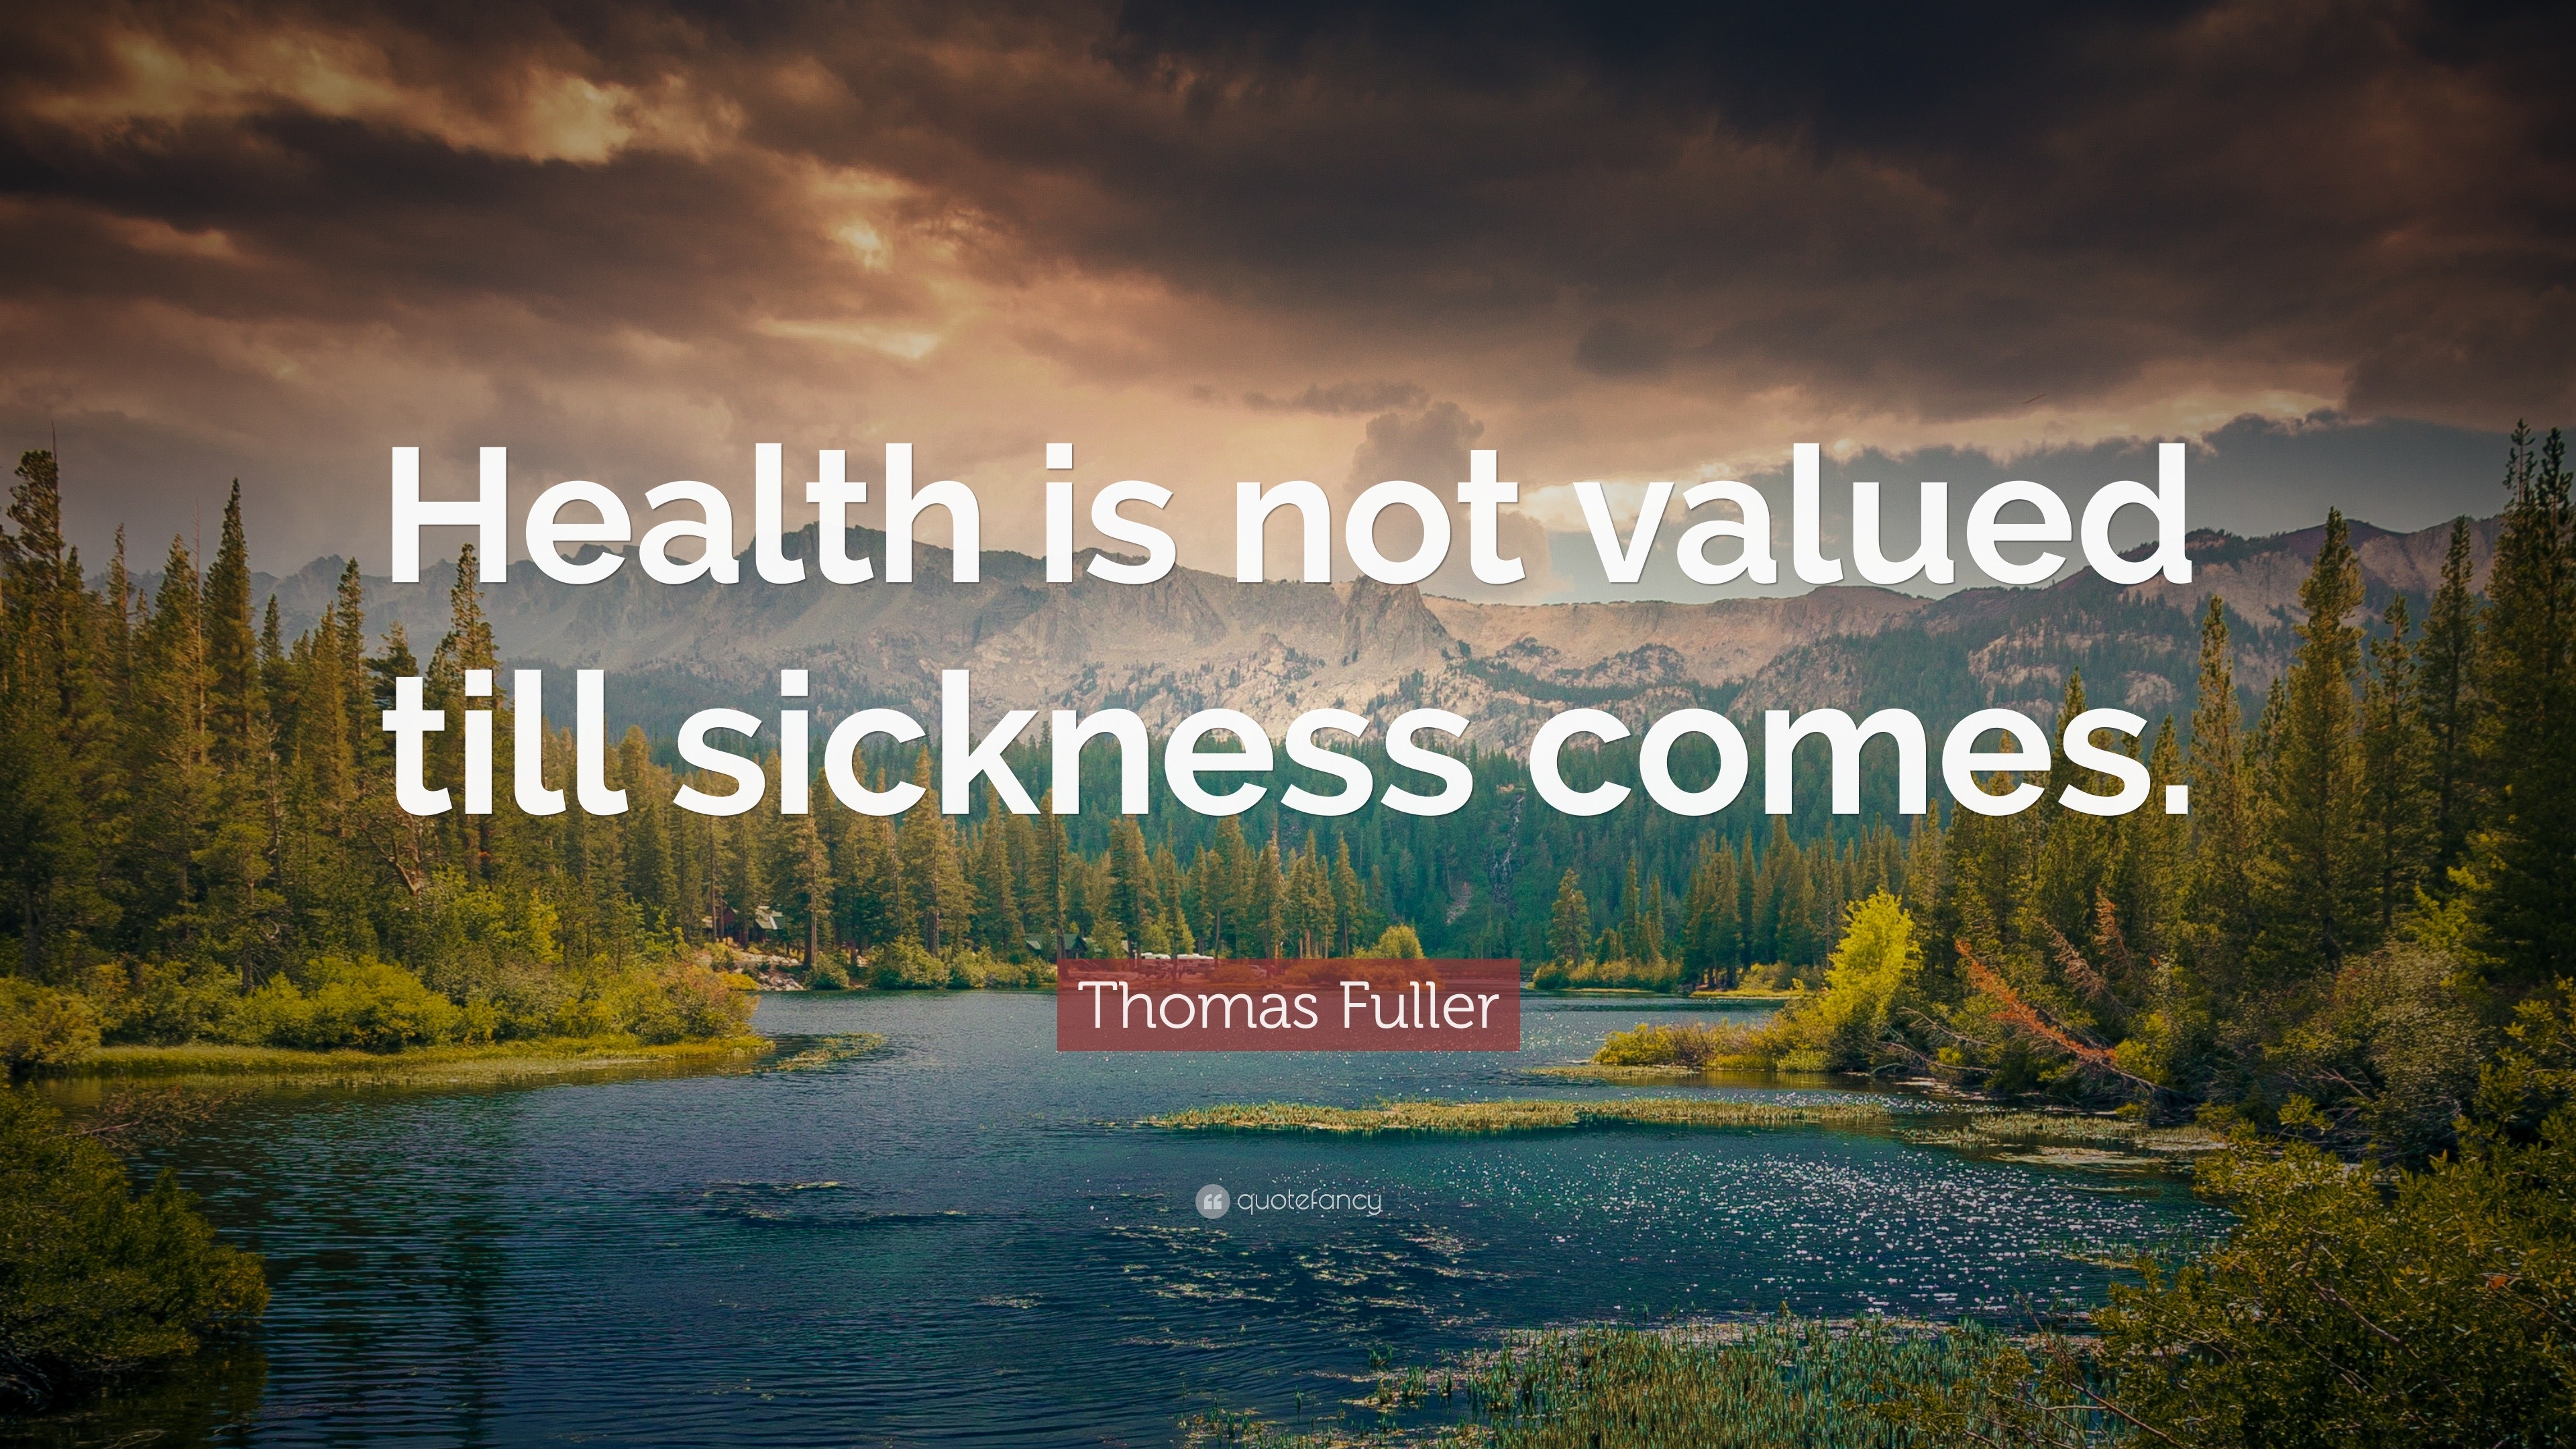 Thomas Fuller Quote: “Health is not valued till sickness comes.” (19